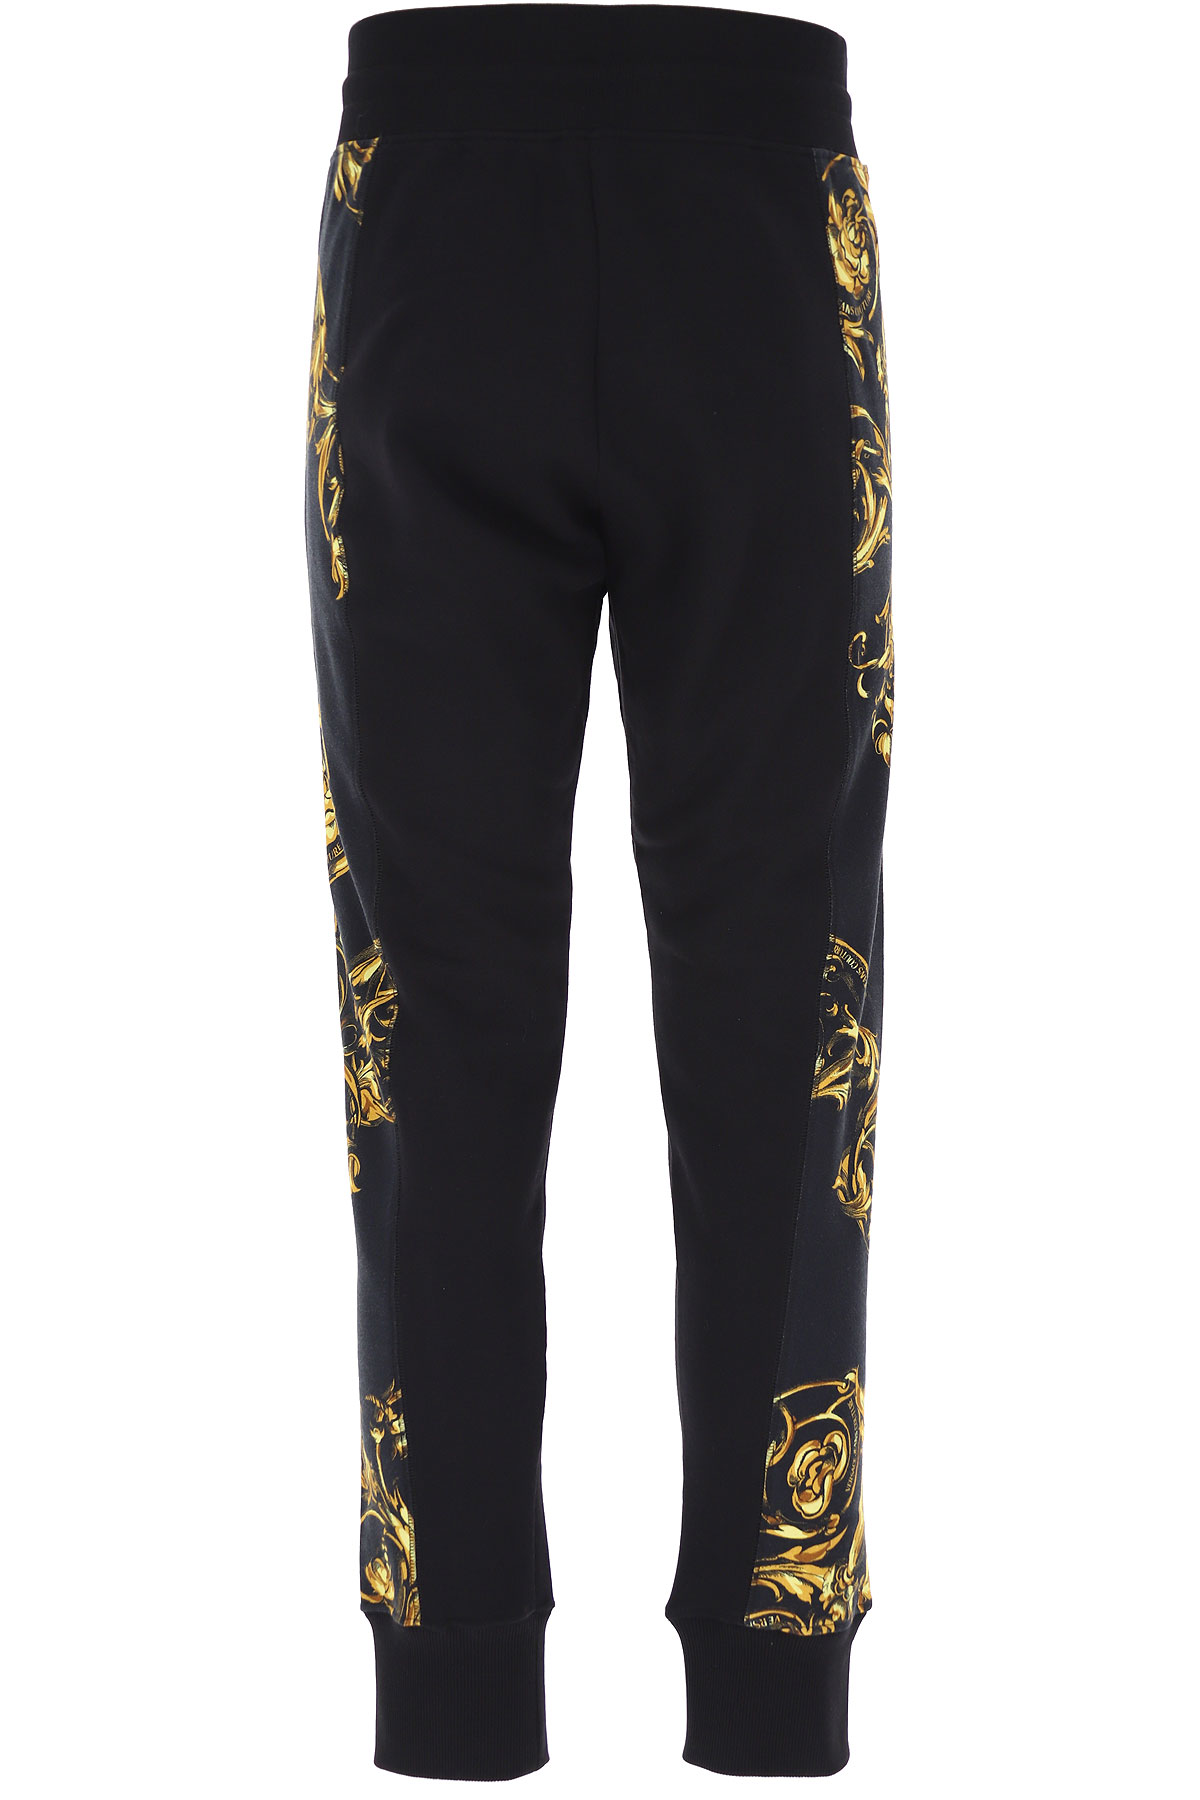 Mens Clothing Versace Jeans Couture , Style code: 72gaa3c9-fs019-g89